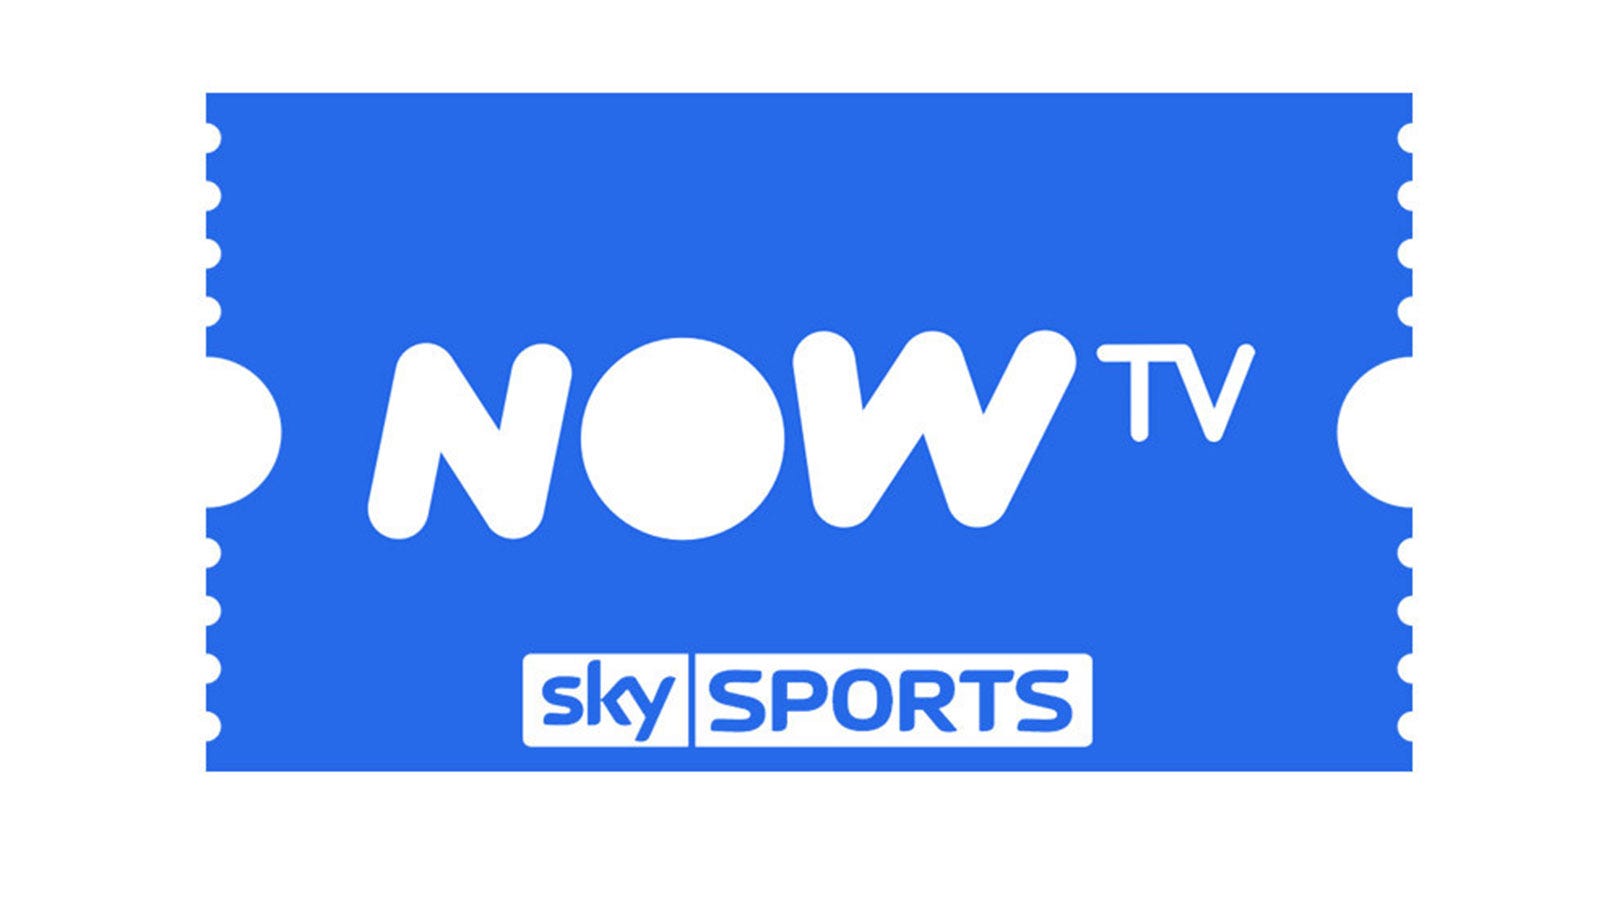 now tv sports pass offer